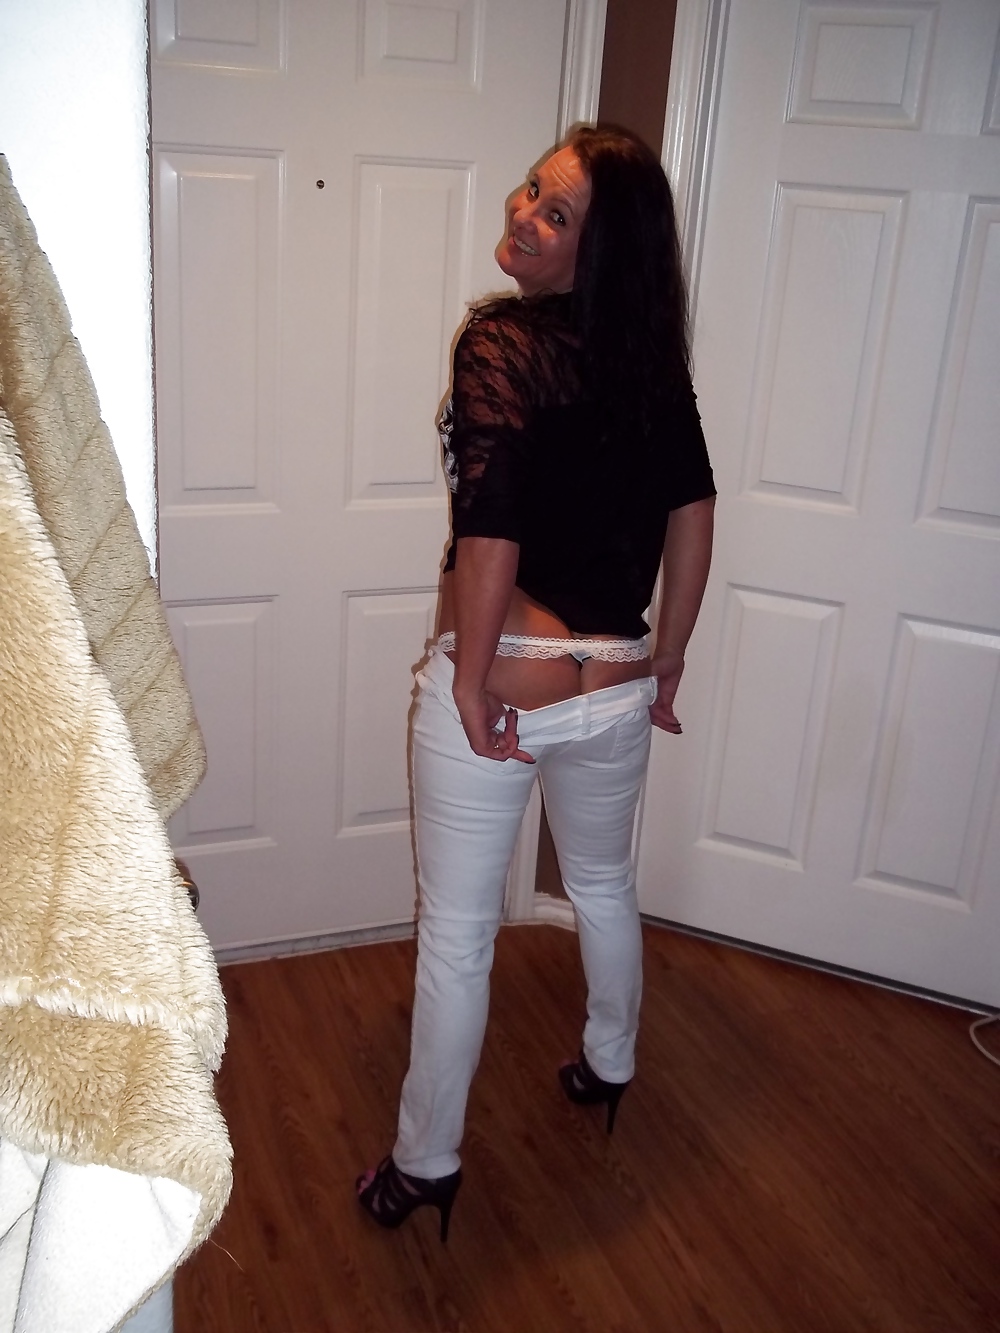 Chance's perfect ass and perky tits in tight white jeans porn pictures